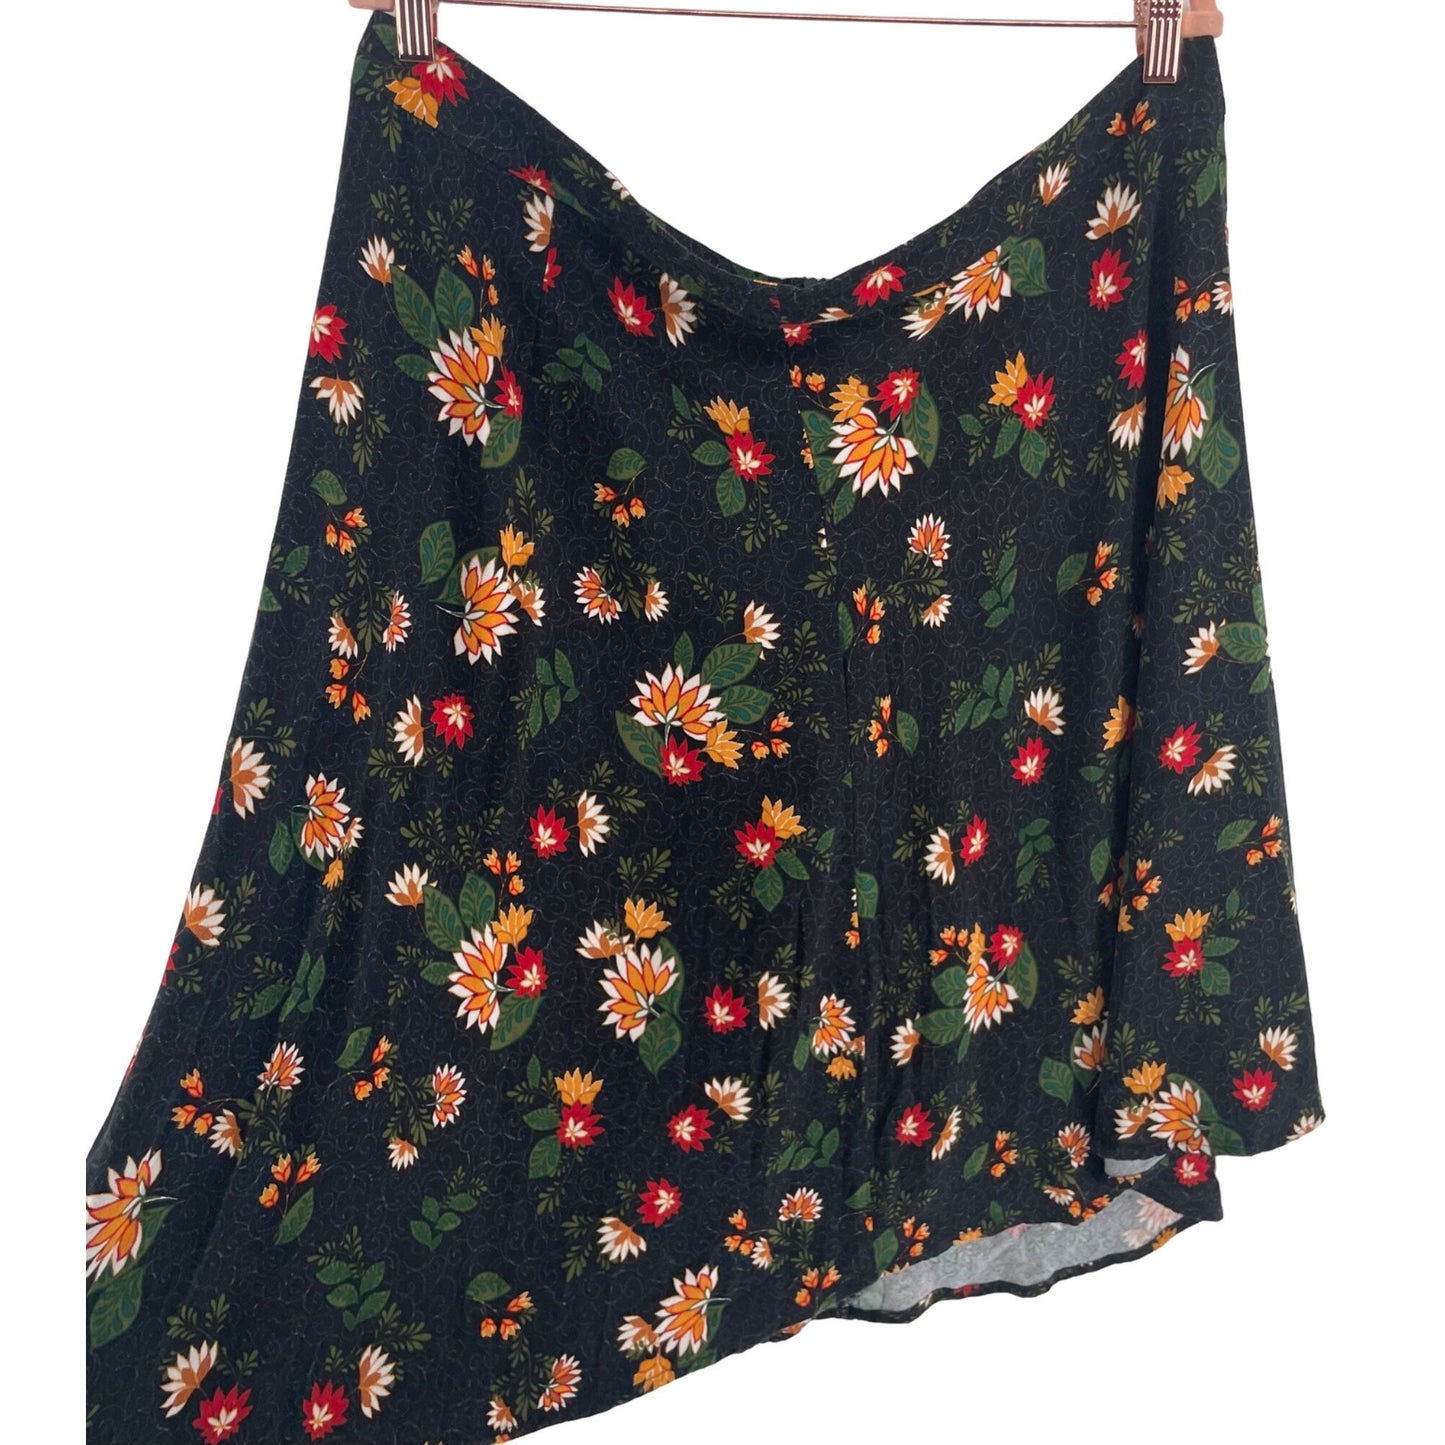 Just Fab Women's Size 2X Black/Multi-Colored Floral A-Line Skirt